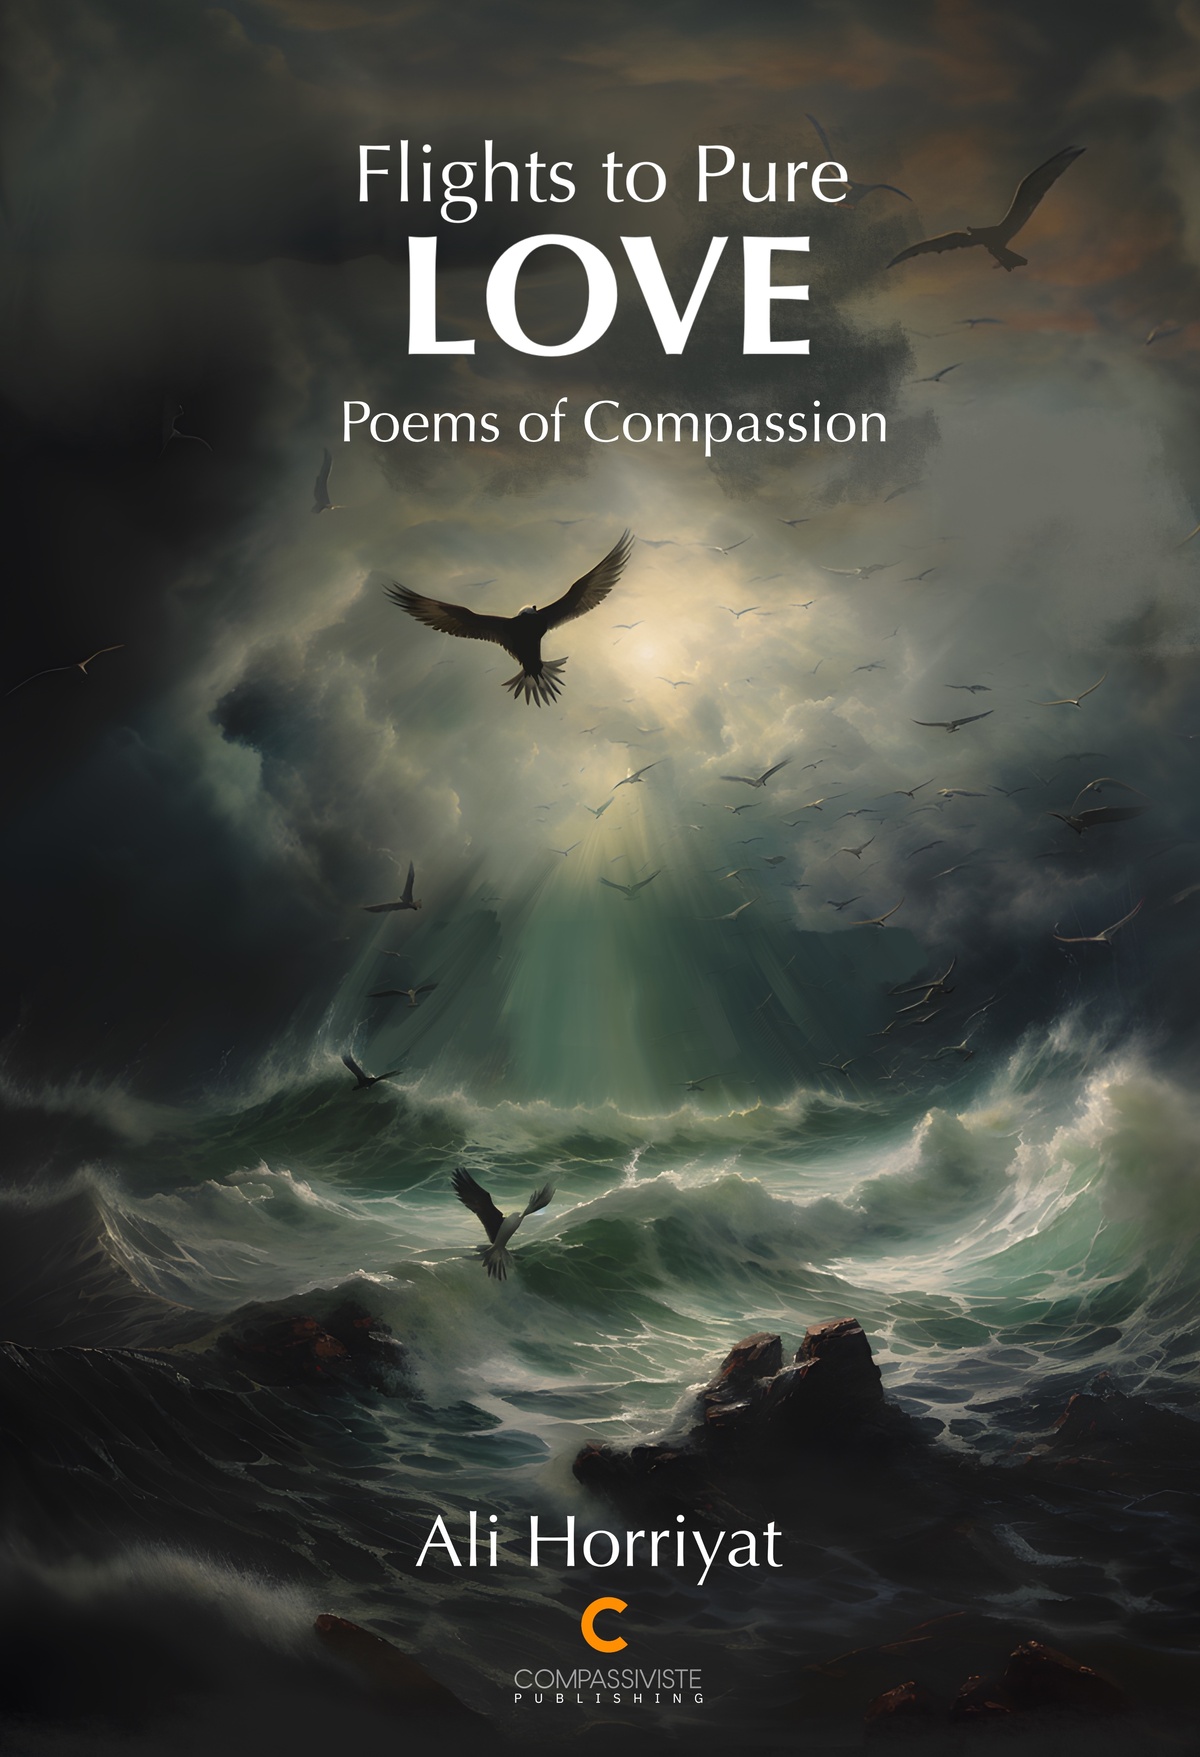 Book cover of Flights to Pure Love by Ali Horriyat